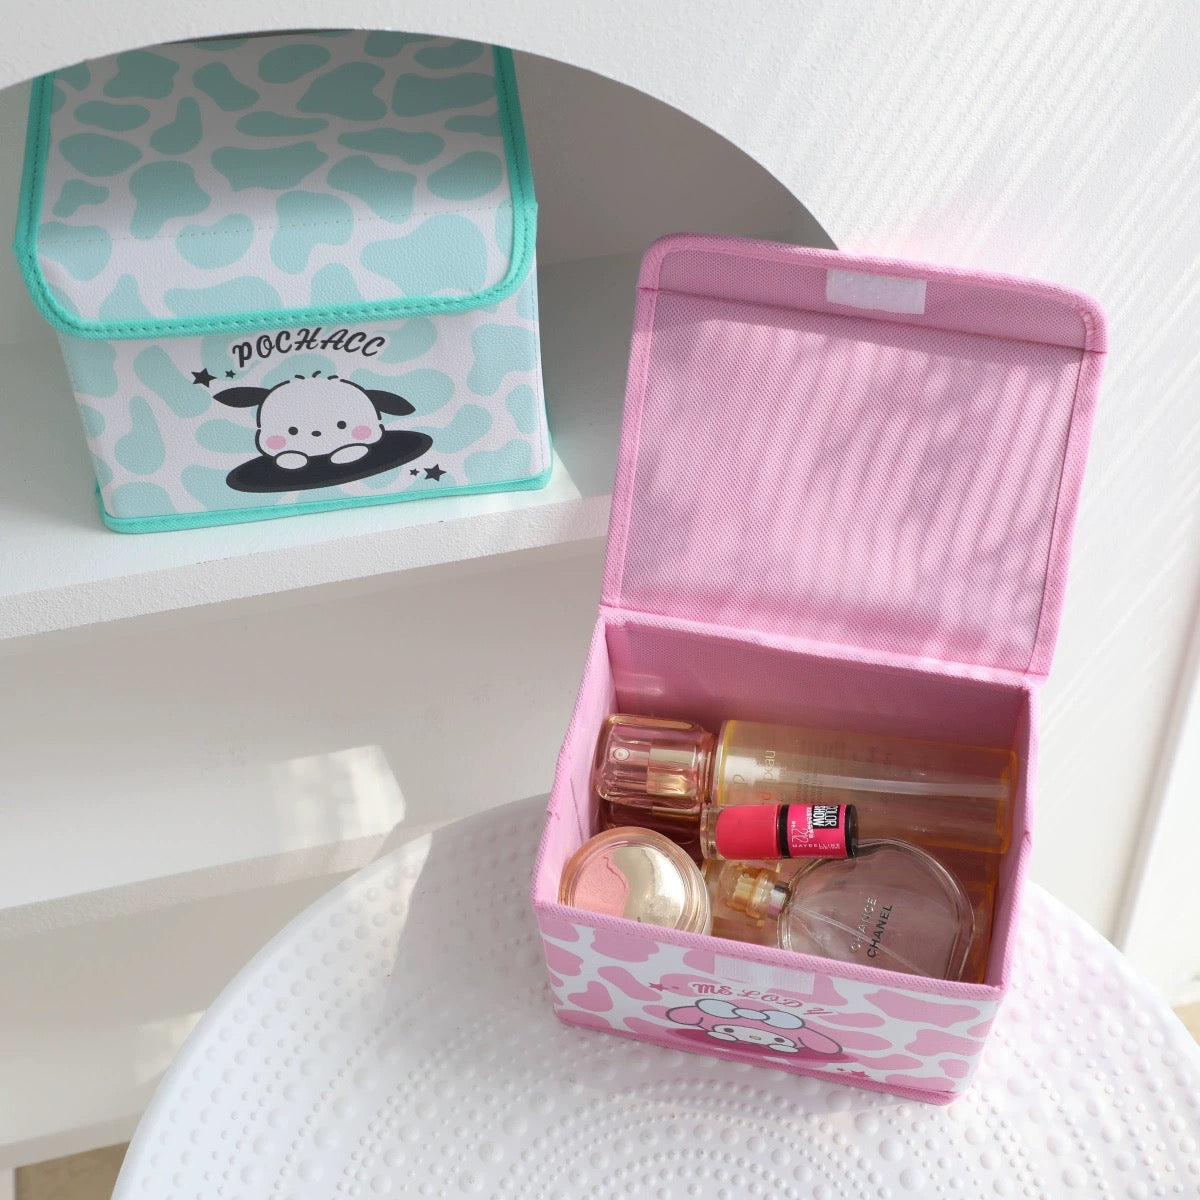 Sanrio Characters with Friends Storage Box with Cover | Hello Kitty My Melody Kuromi Little Twin Stars Marron Cream Cinnamoroll Pompompurin Pocahcco KeroKeroKeroppi Hangyodon - Bedroom Girl Gift